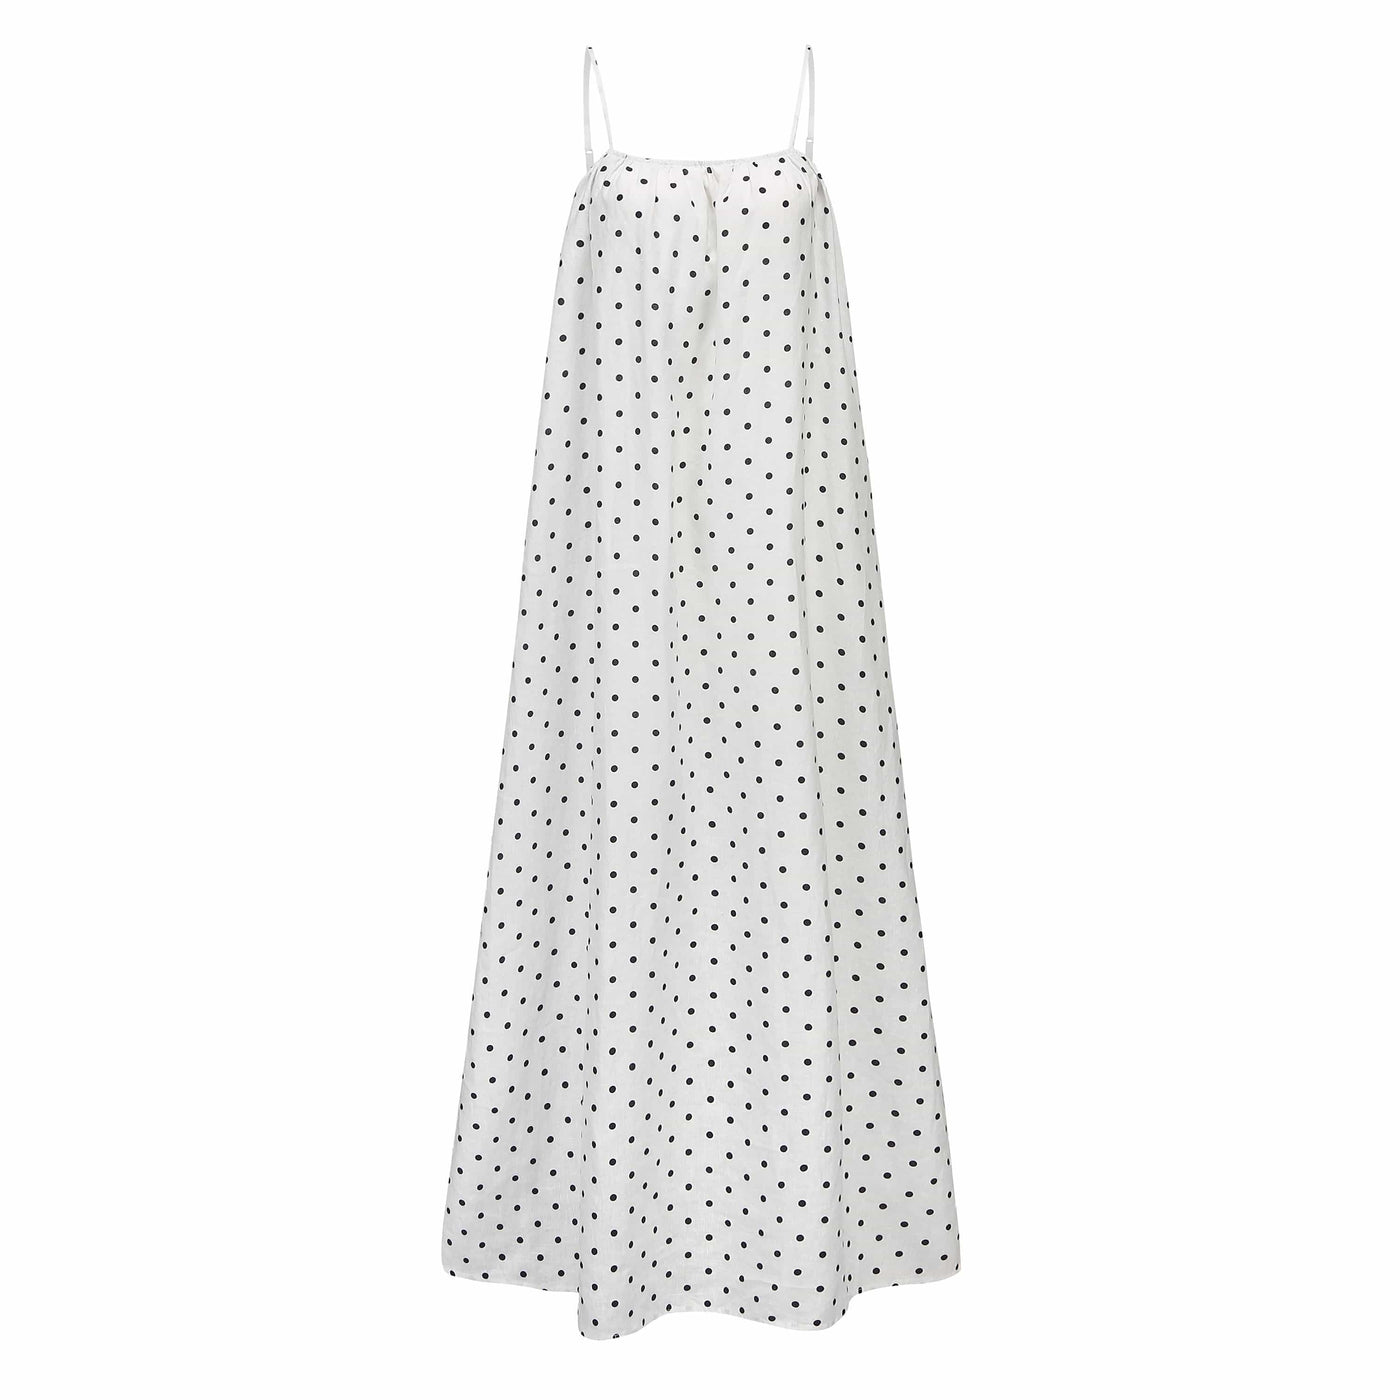 Lilly Pilly Collection 100% organic linen Olive Dress in Polka Dot